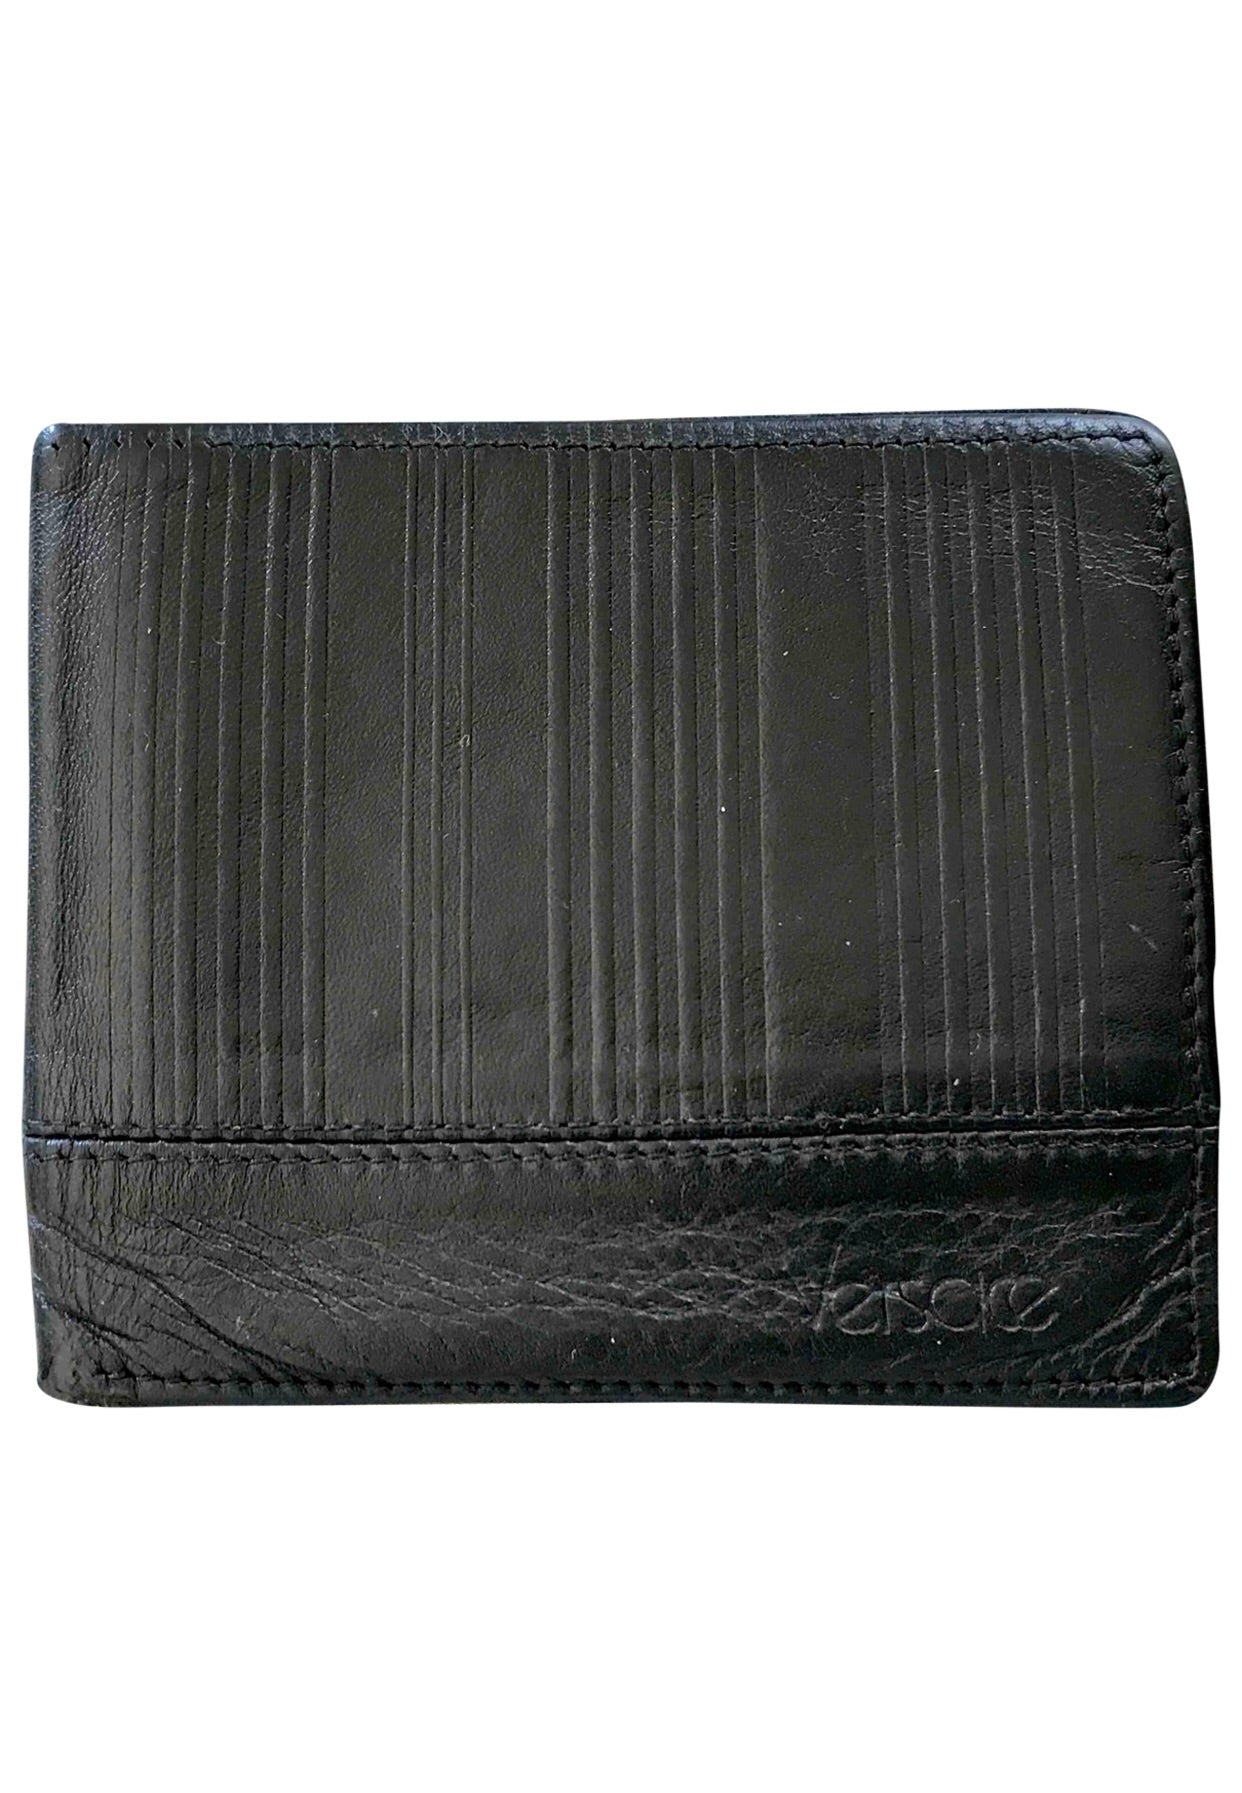 Versace Navy Blue Compact Smooth Leather Gold Toned Medusa Snap Bifold  Wallet - Walmart.com